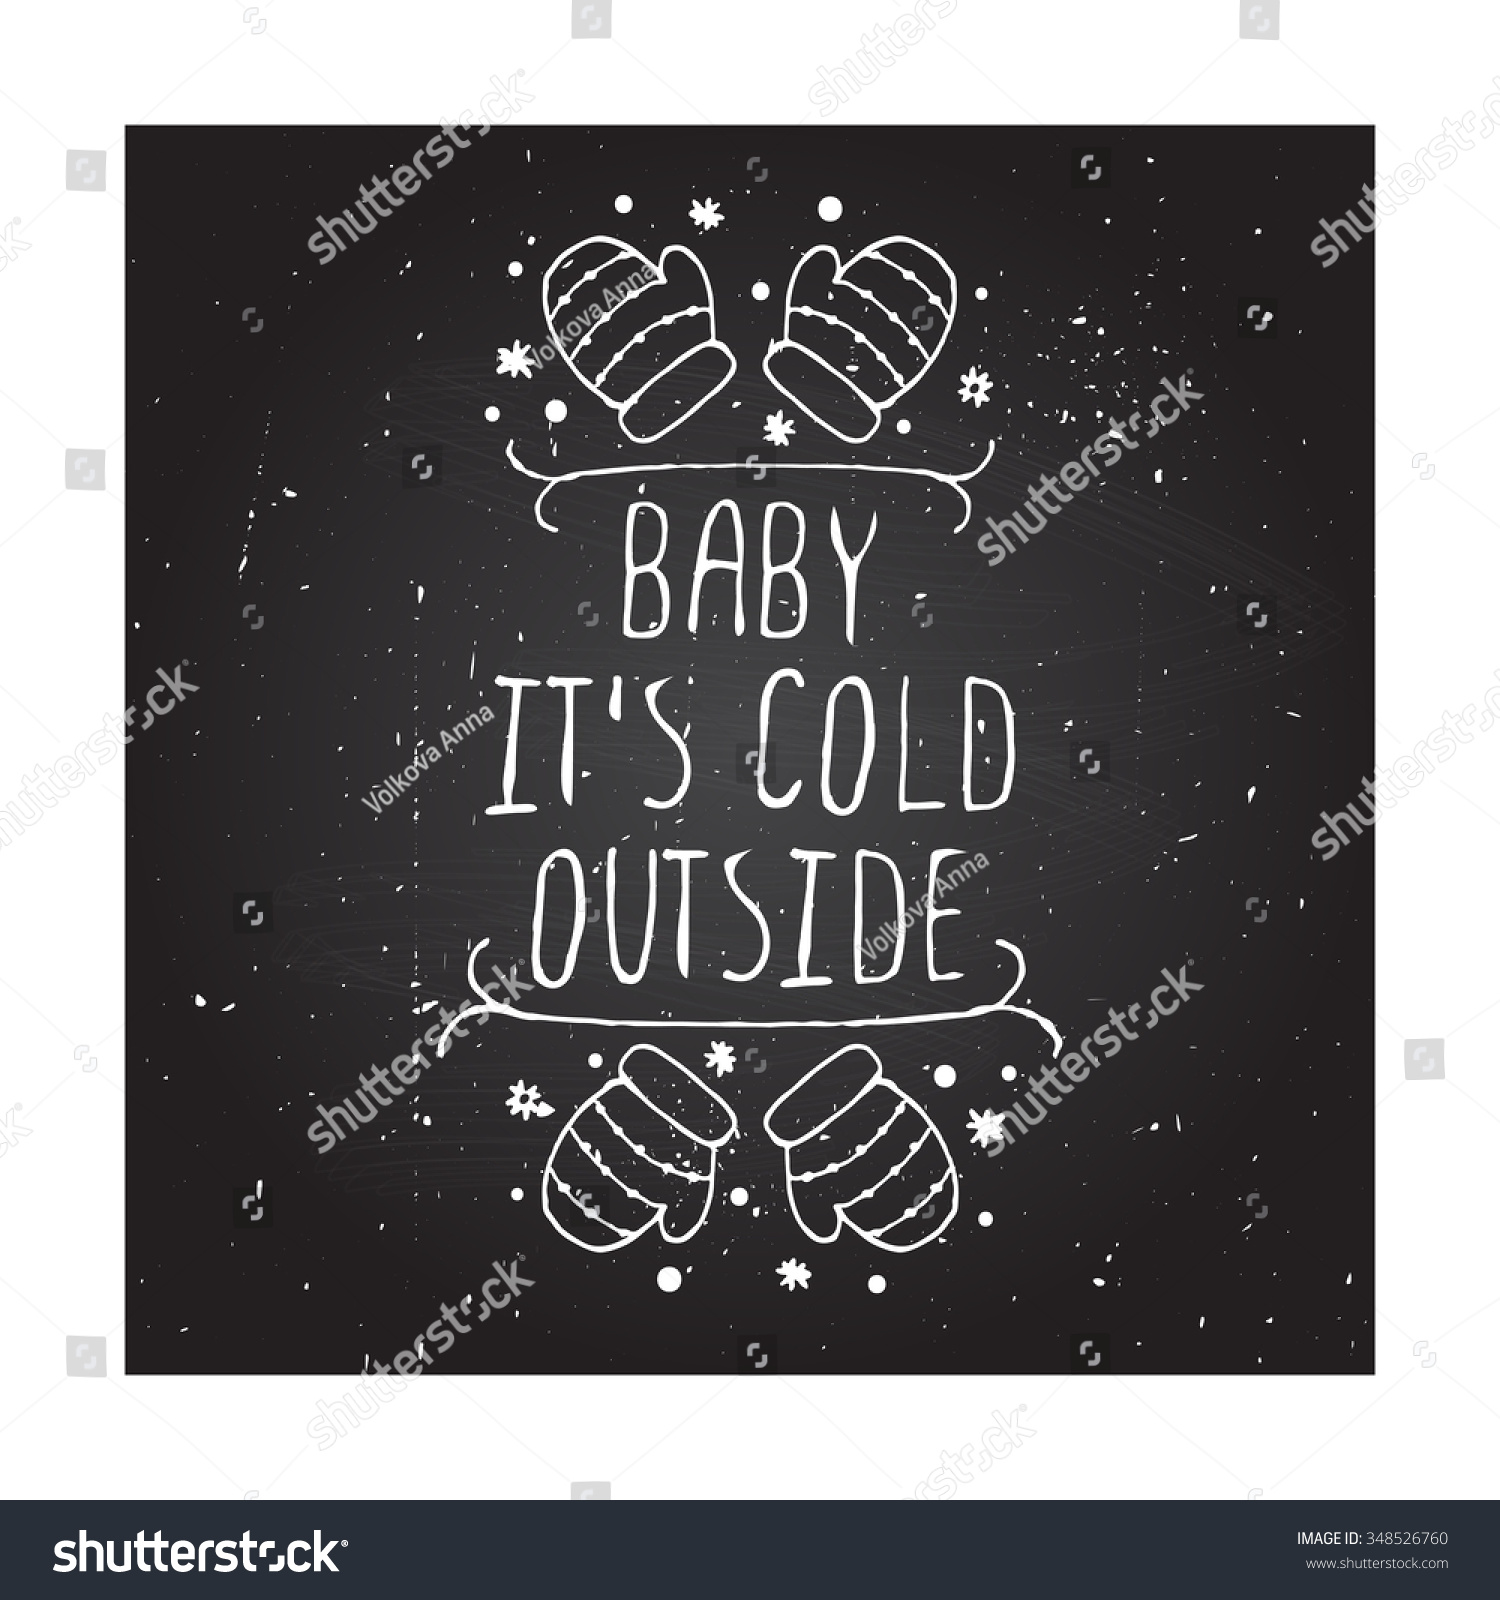 Christmas handdrawn greeting card with text on chalkboard background Baby its cold outside Chalkboard